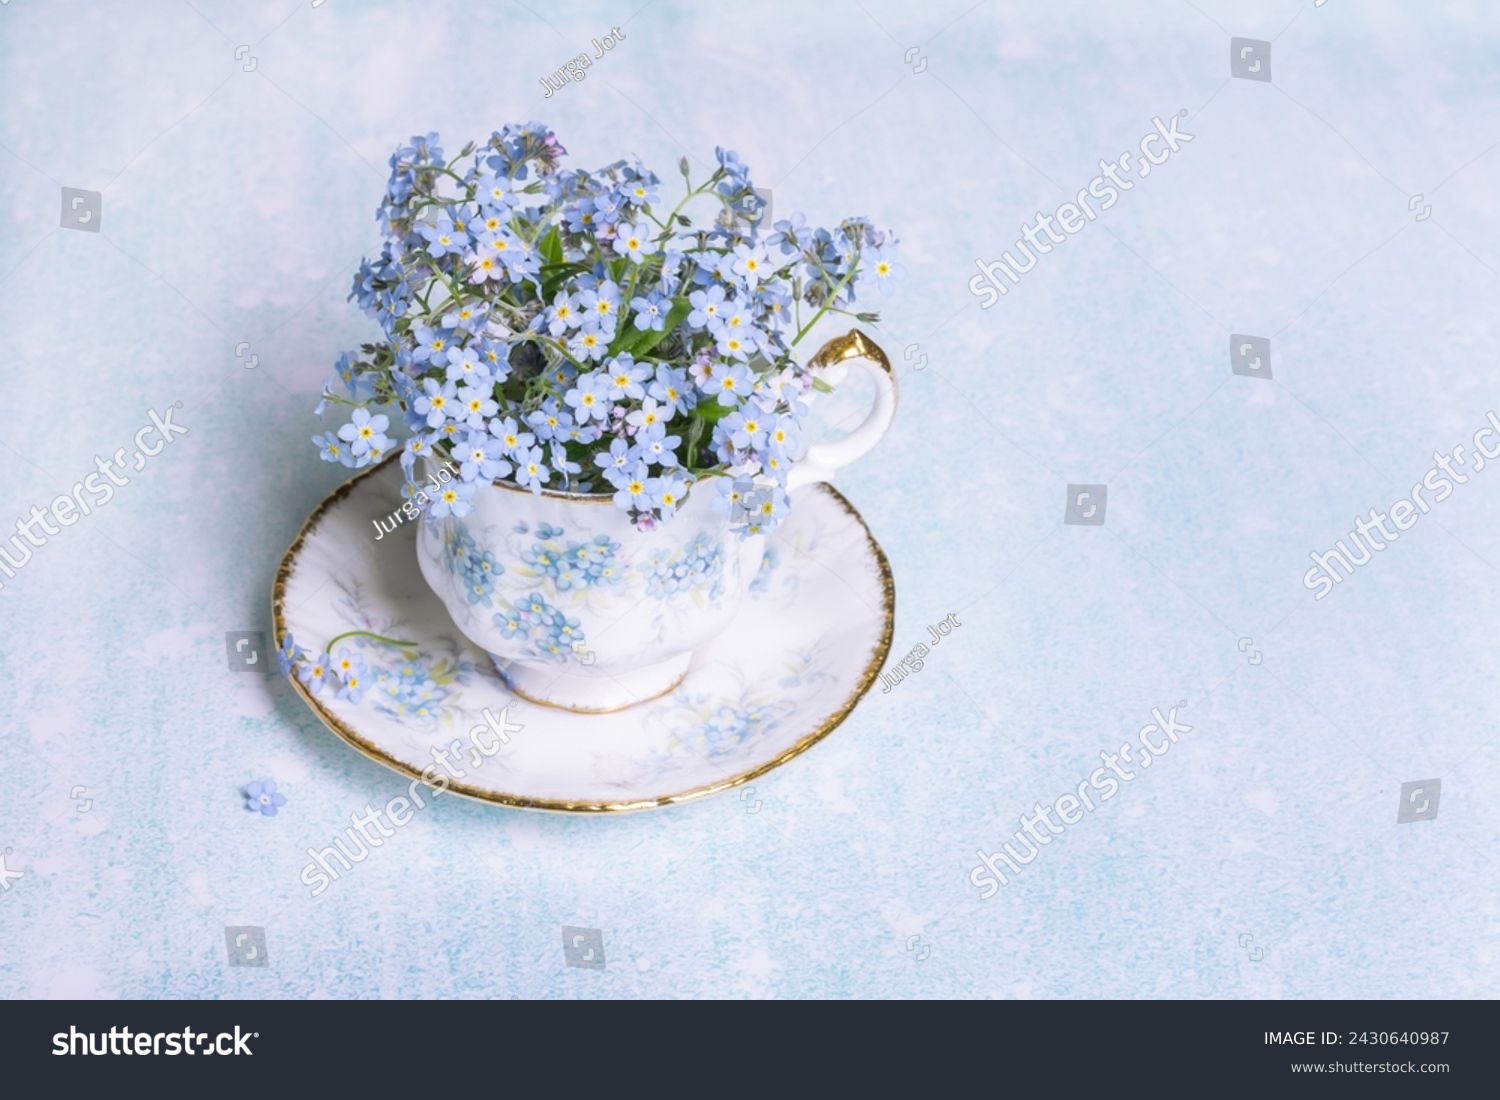 Forget-me-not flowers in small vintage antique porcelain tea cup decorated with forget-me-not blossoms isolated on light blue color background, fresh forget me nots, copy space #2430640987